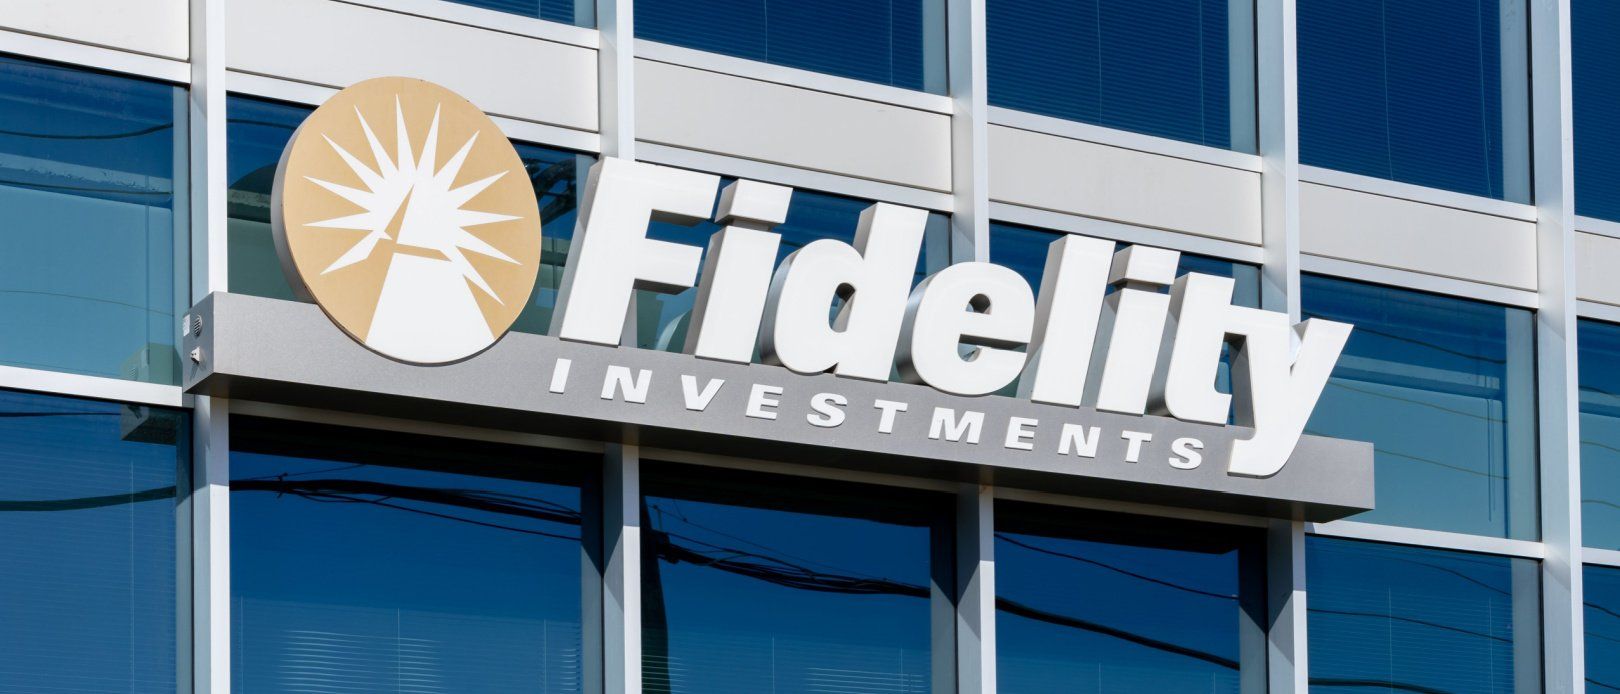 Fidelity Investments Inc. is an American multinational financial services corporation.